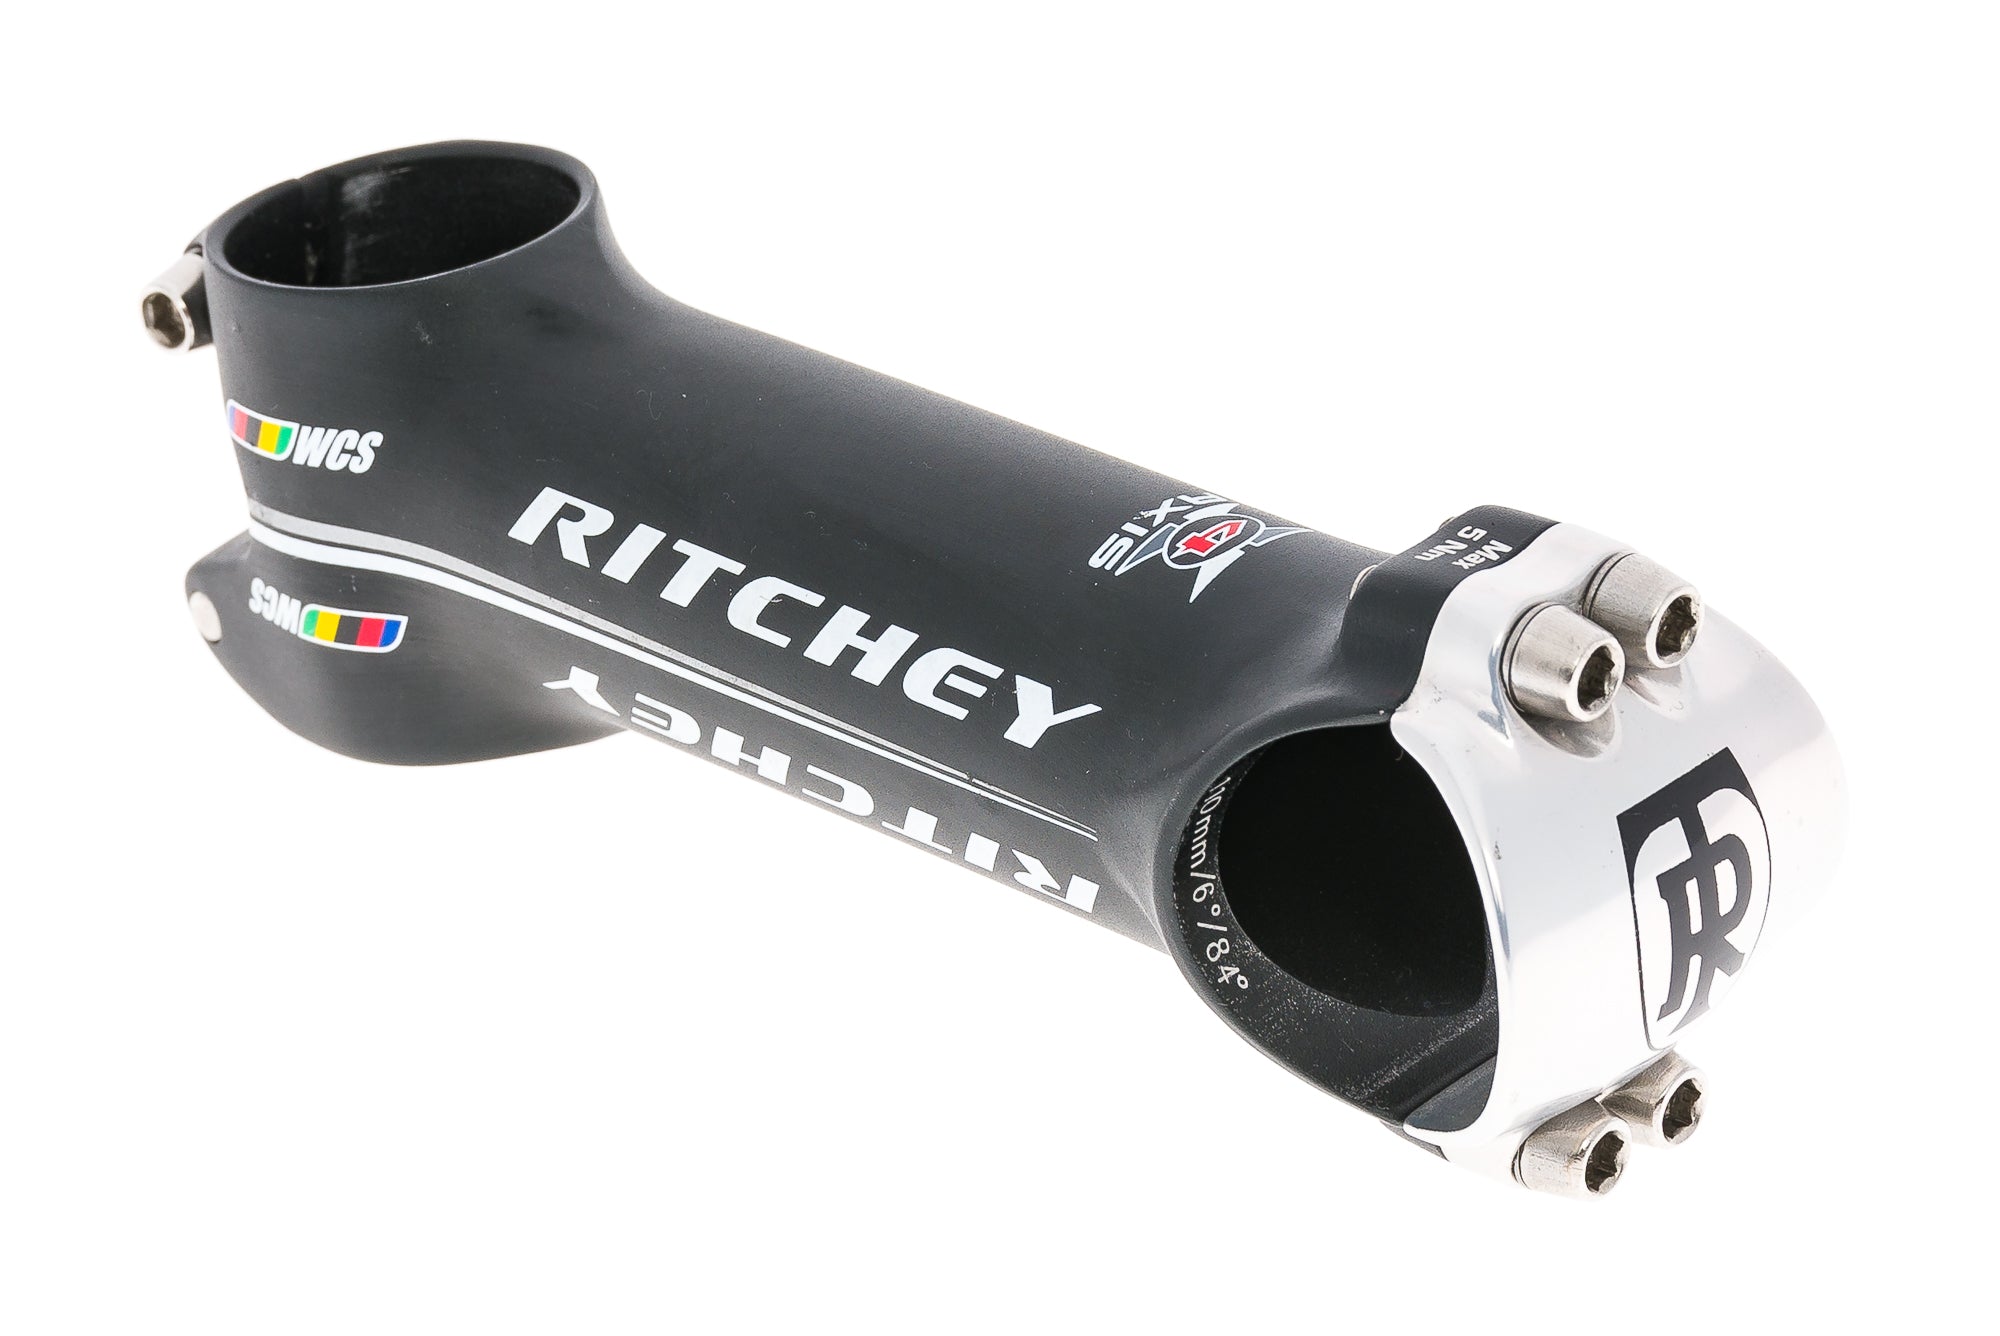 Ritchey WCS 4 Axis Aluminum Stem 31.8mm Clamp 110mm 6 Degree Black drive side